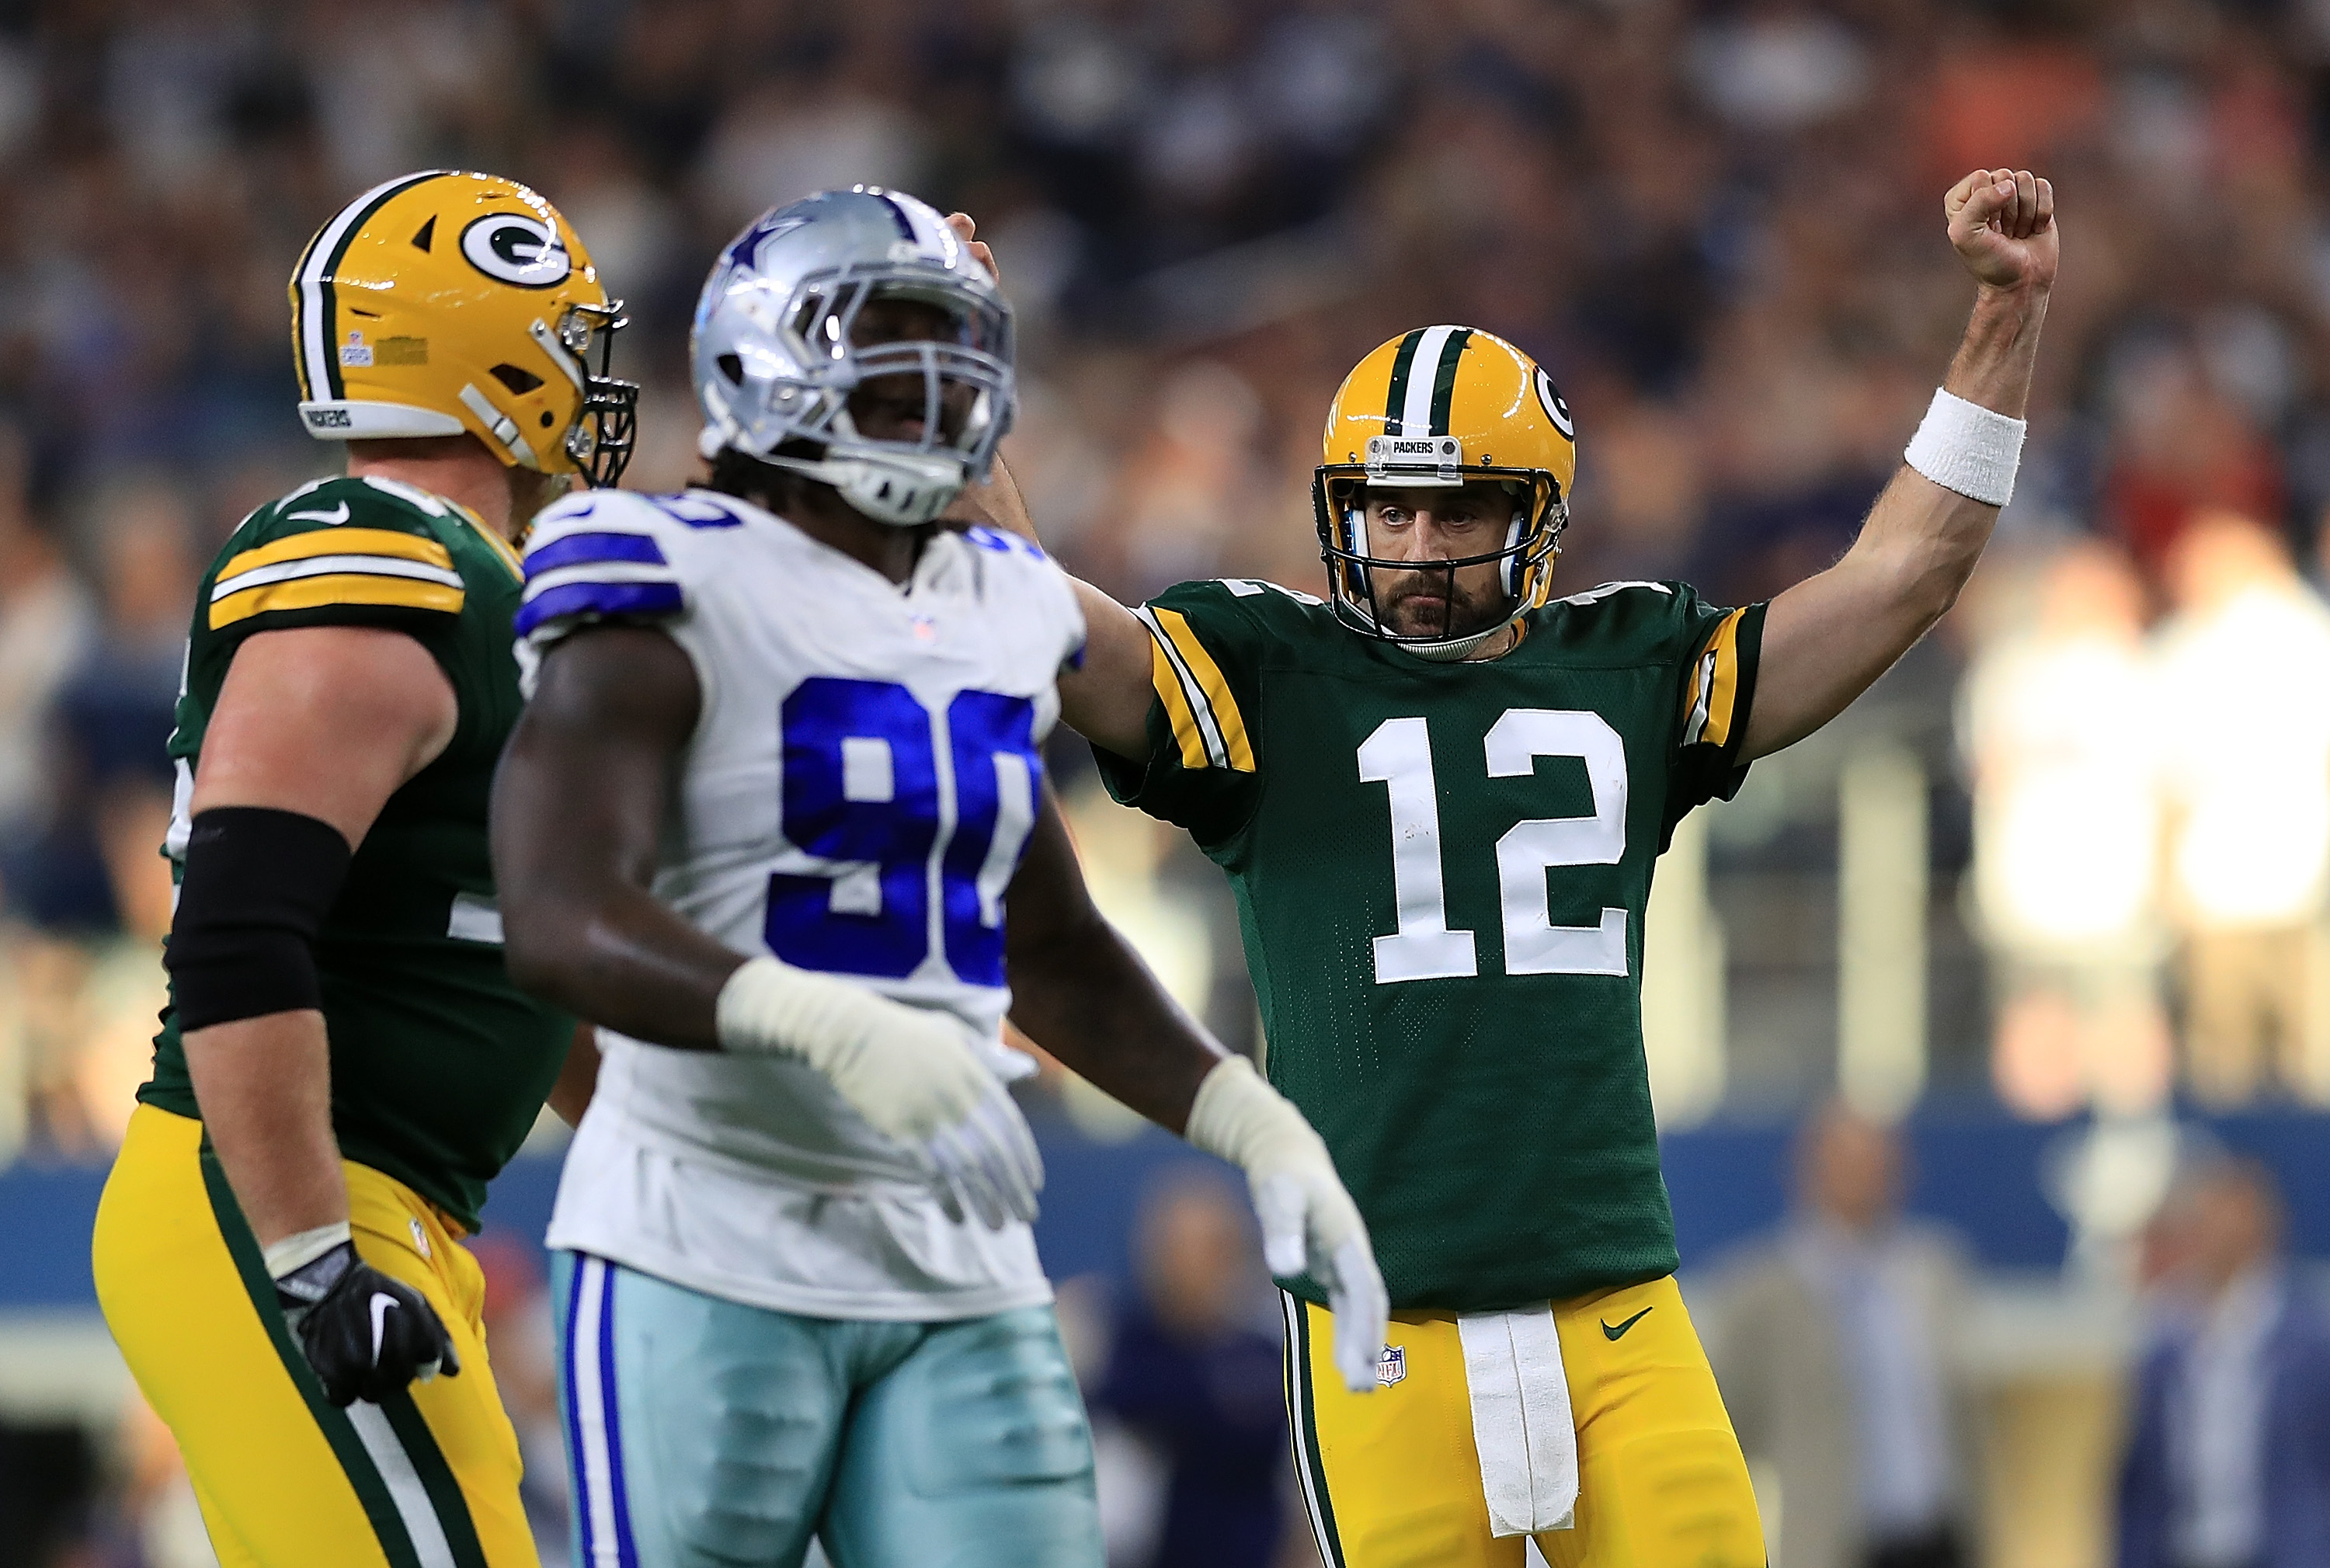 Dallas Cowboys Collapse, Lose in OT to Green Bay Packers at Lamboo